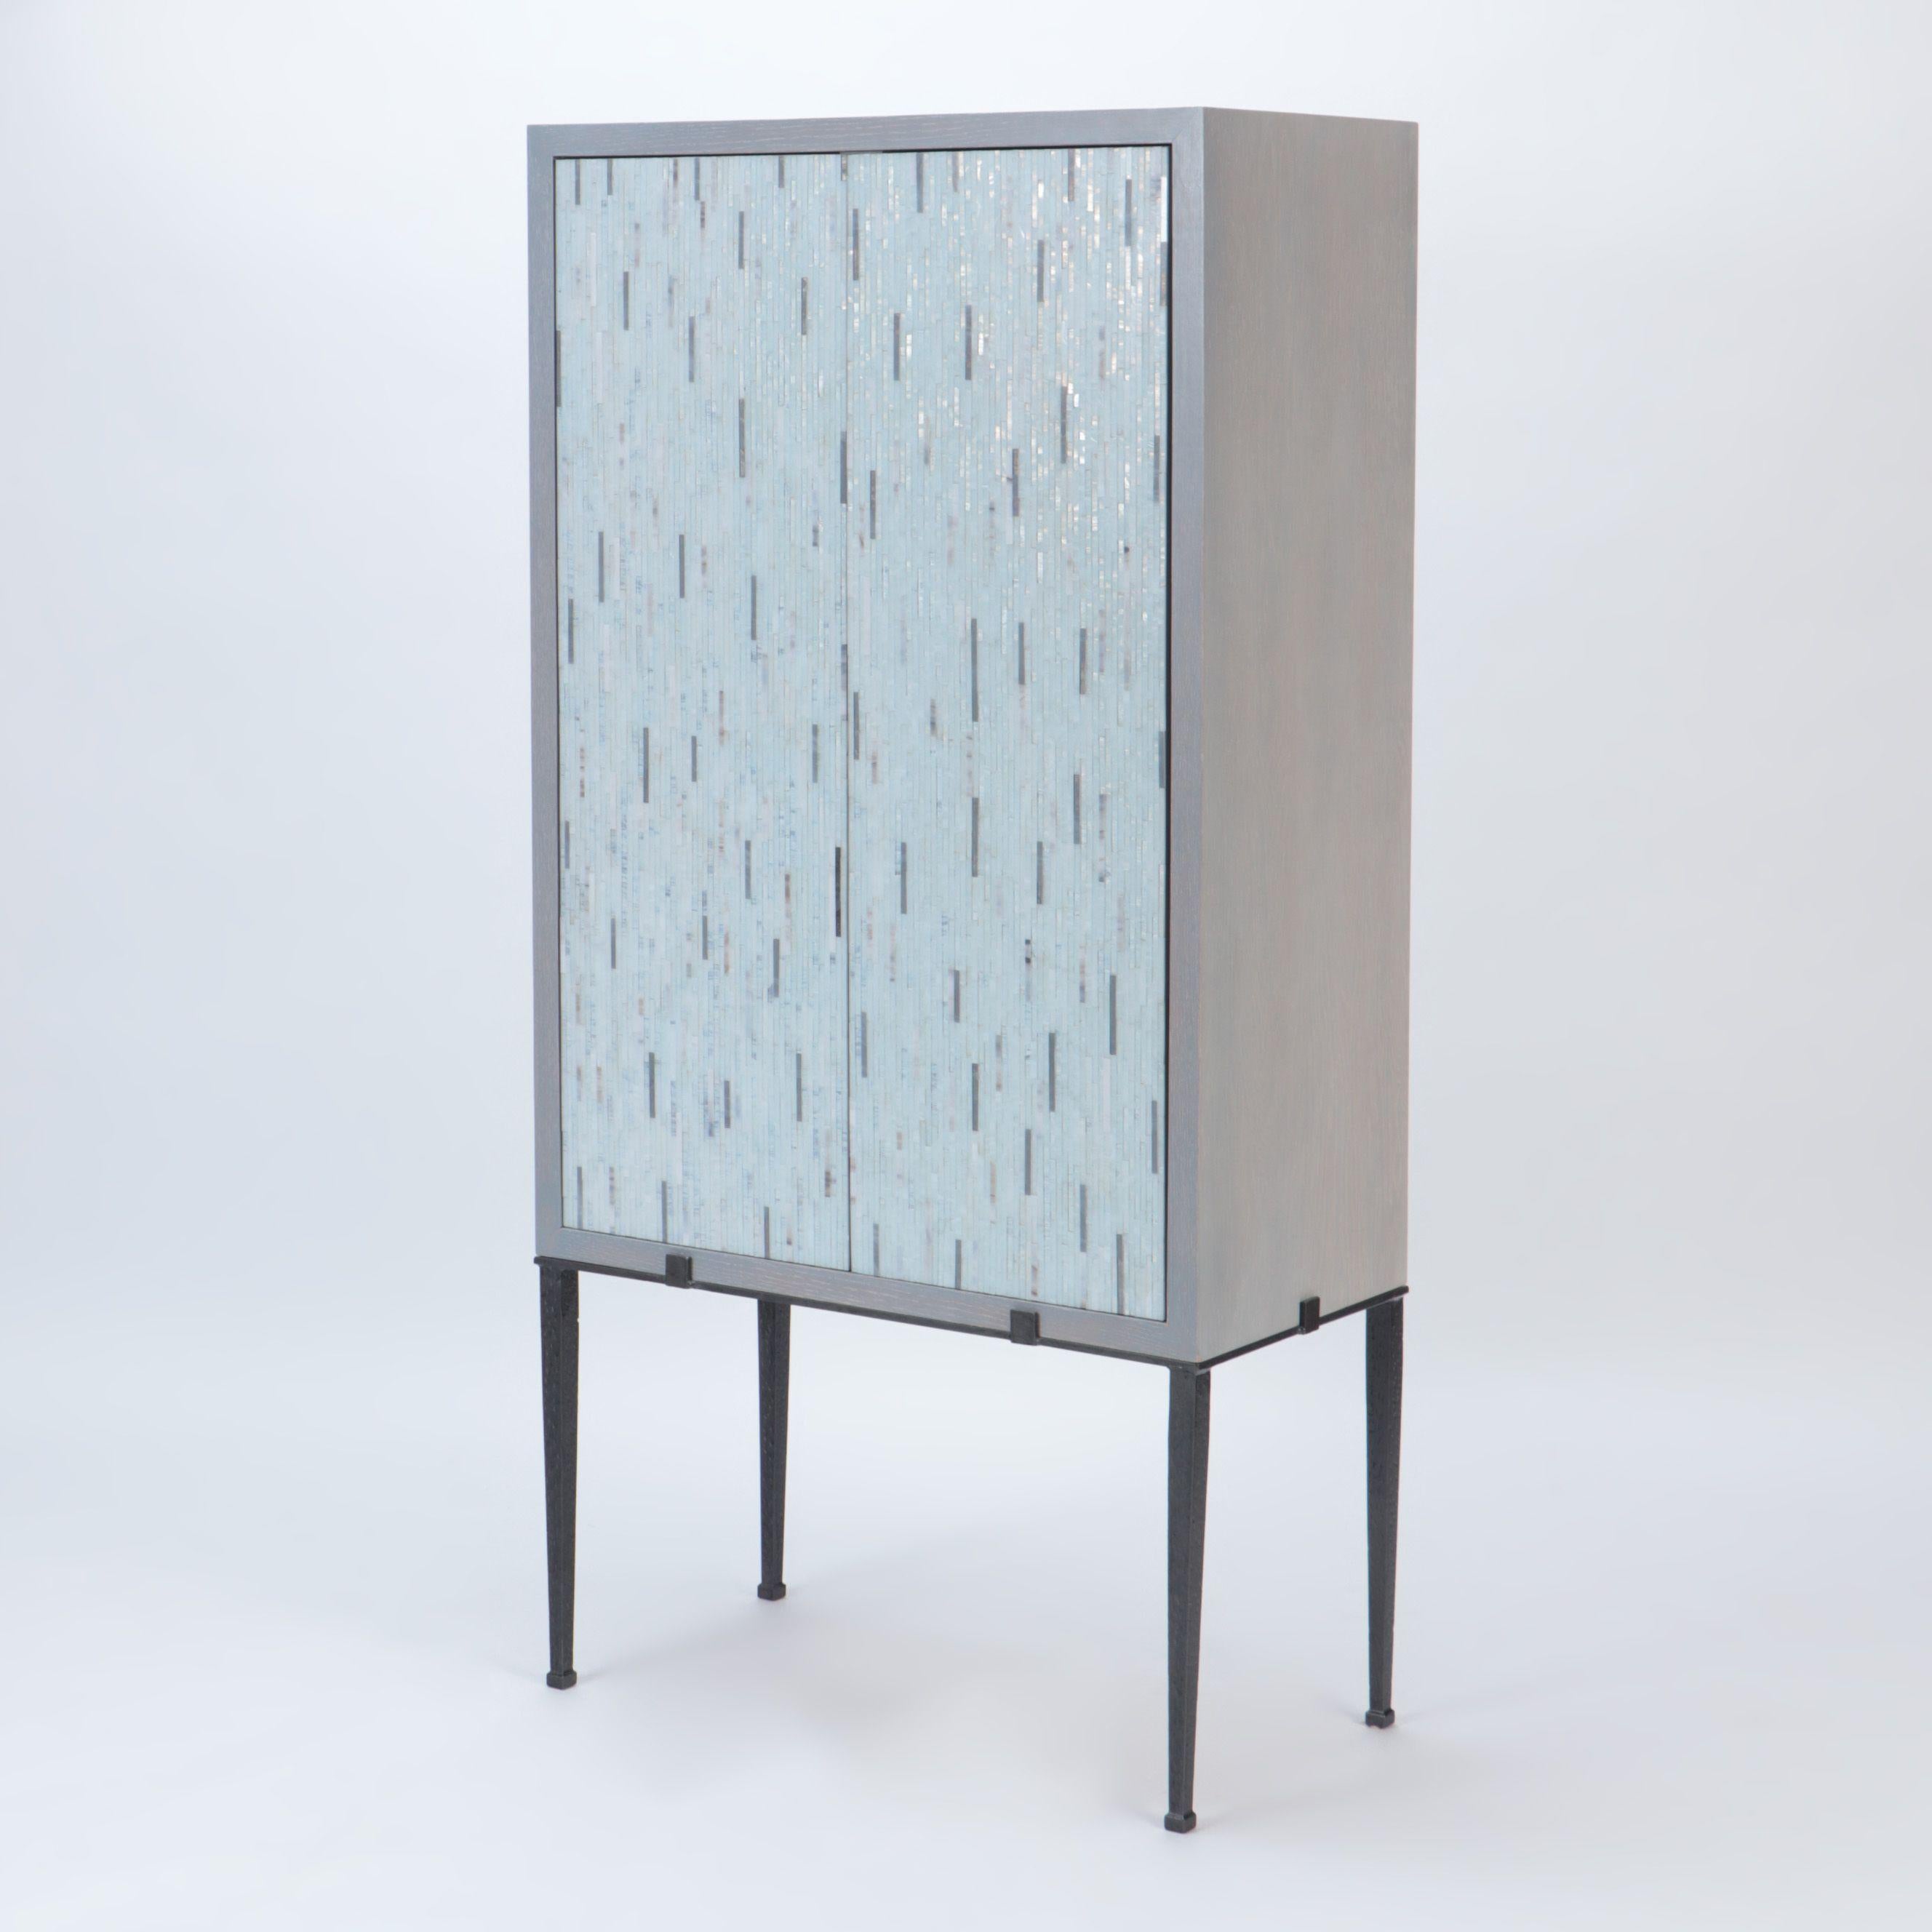 A stylish custom-made cerused oak cabinet having mosaic glass.
Doors and resting on a painted black steel frame.